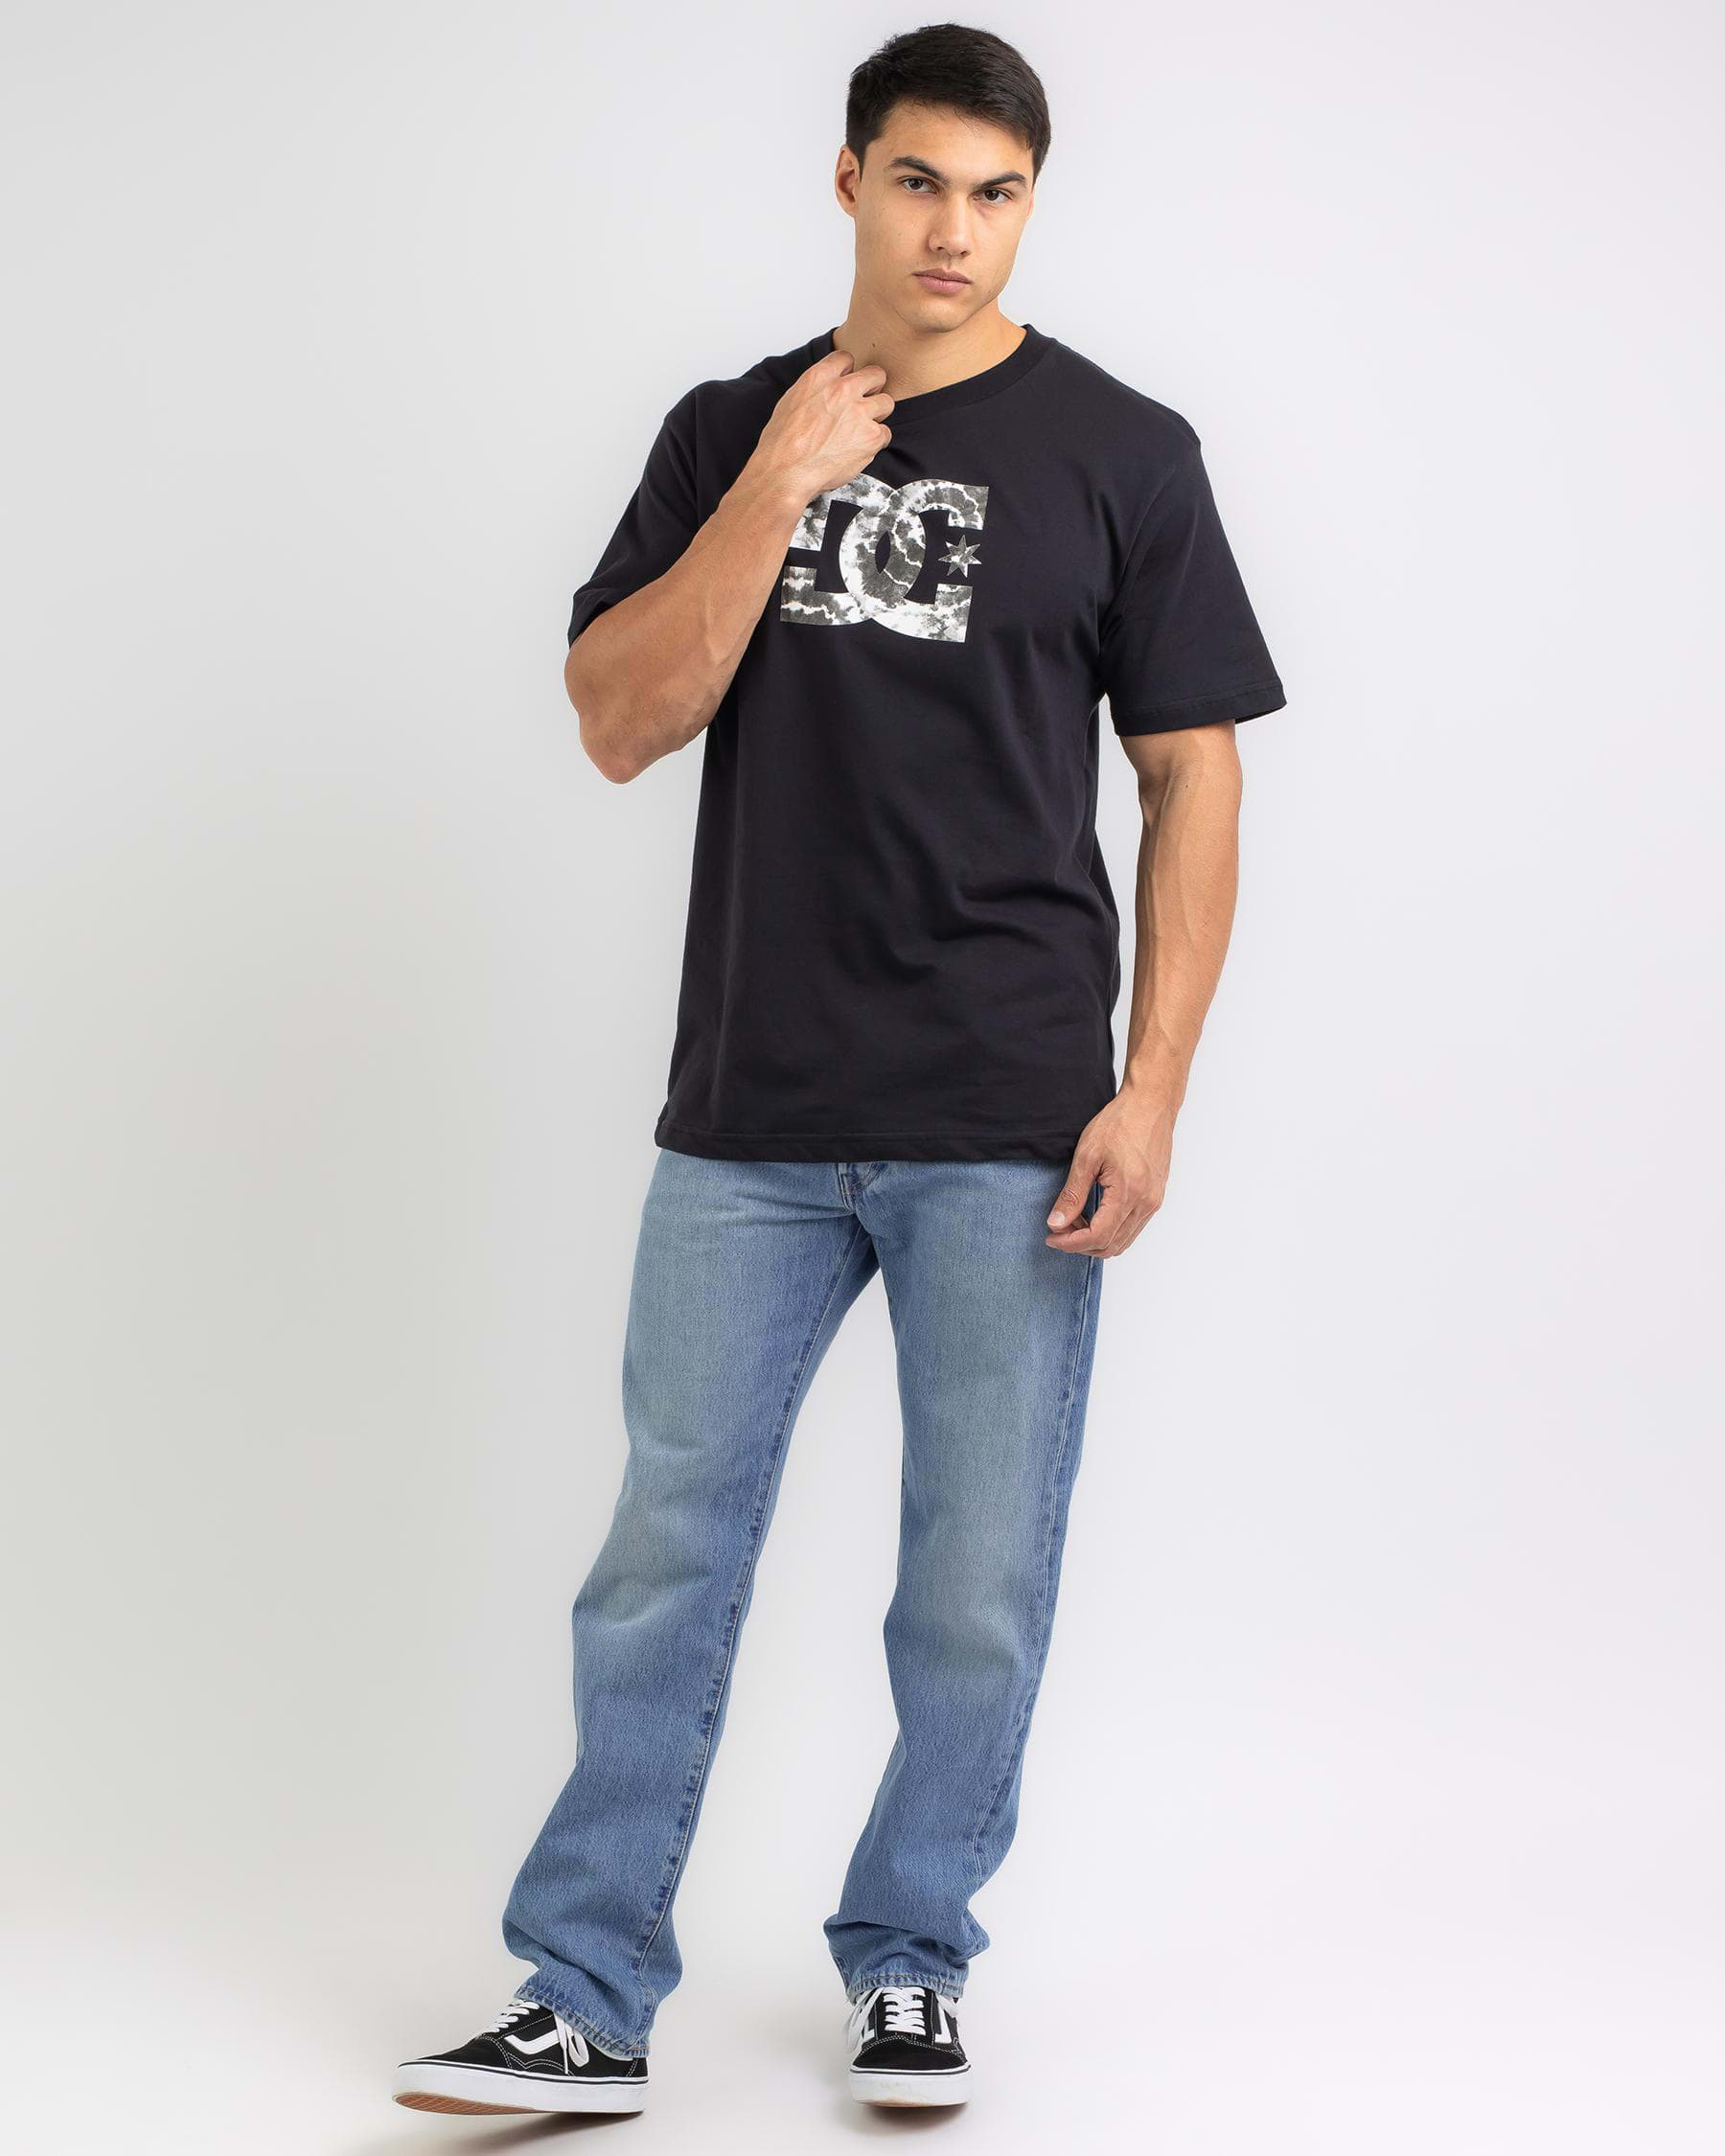 DC Shoes DC Star Fill - United Easy States Returns City Shipping Beach T-Shirt FREE* Black In - 